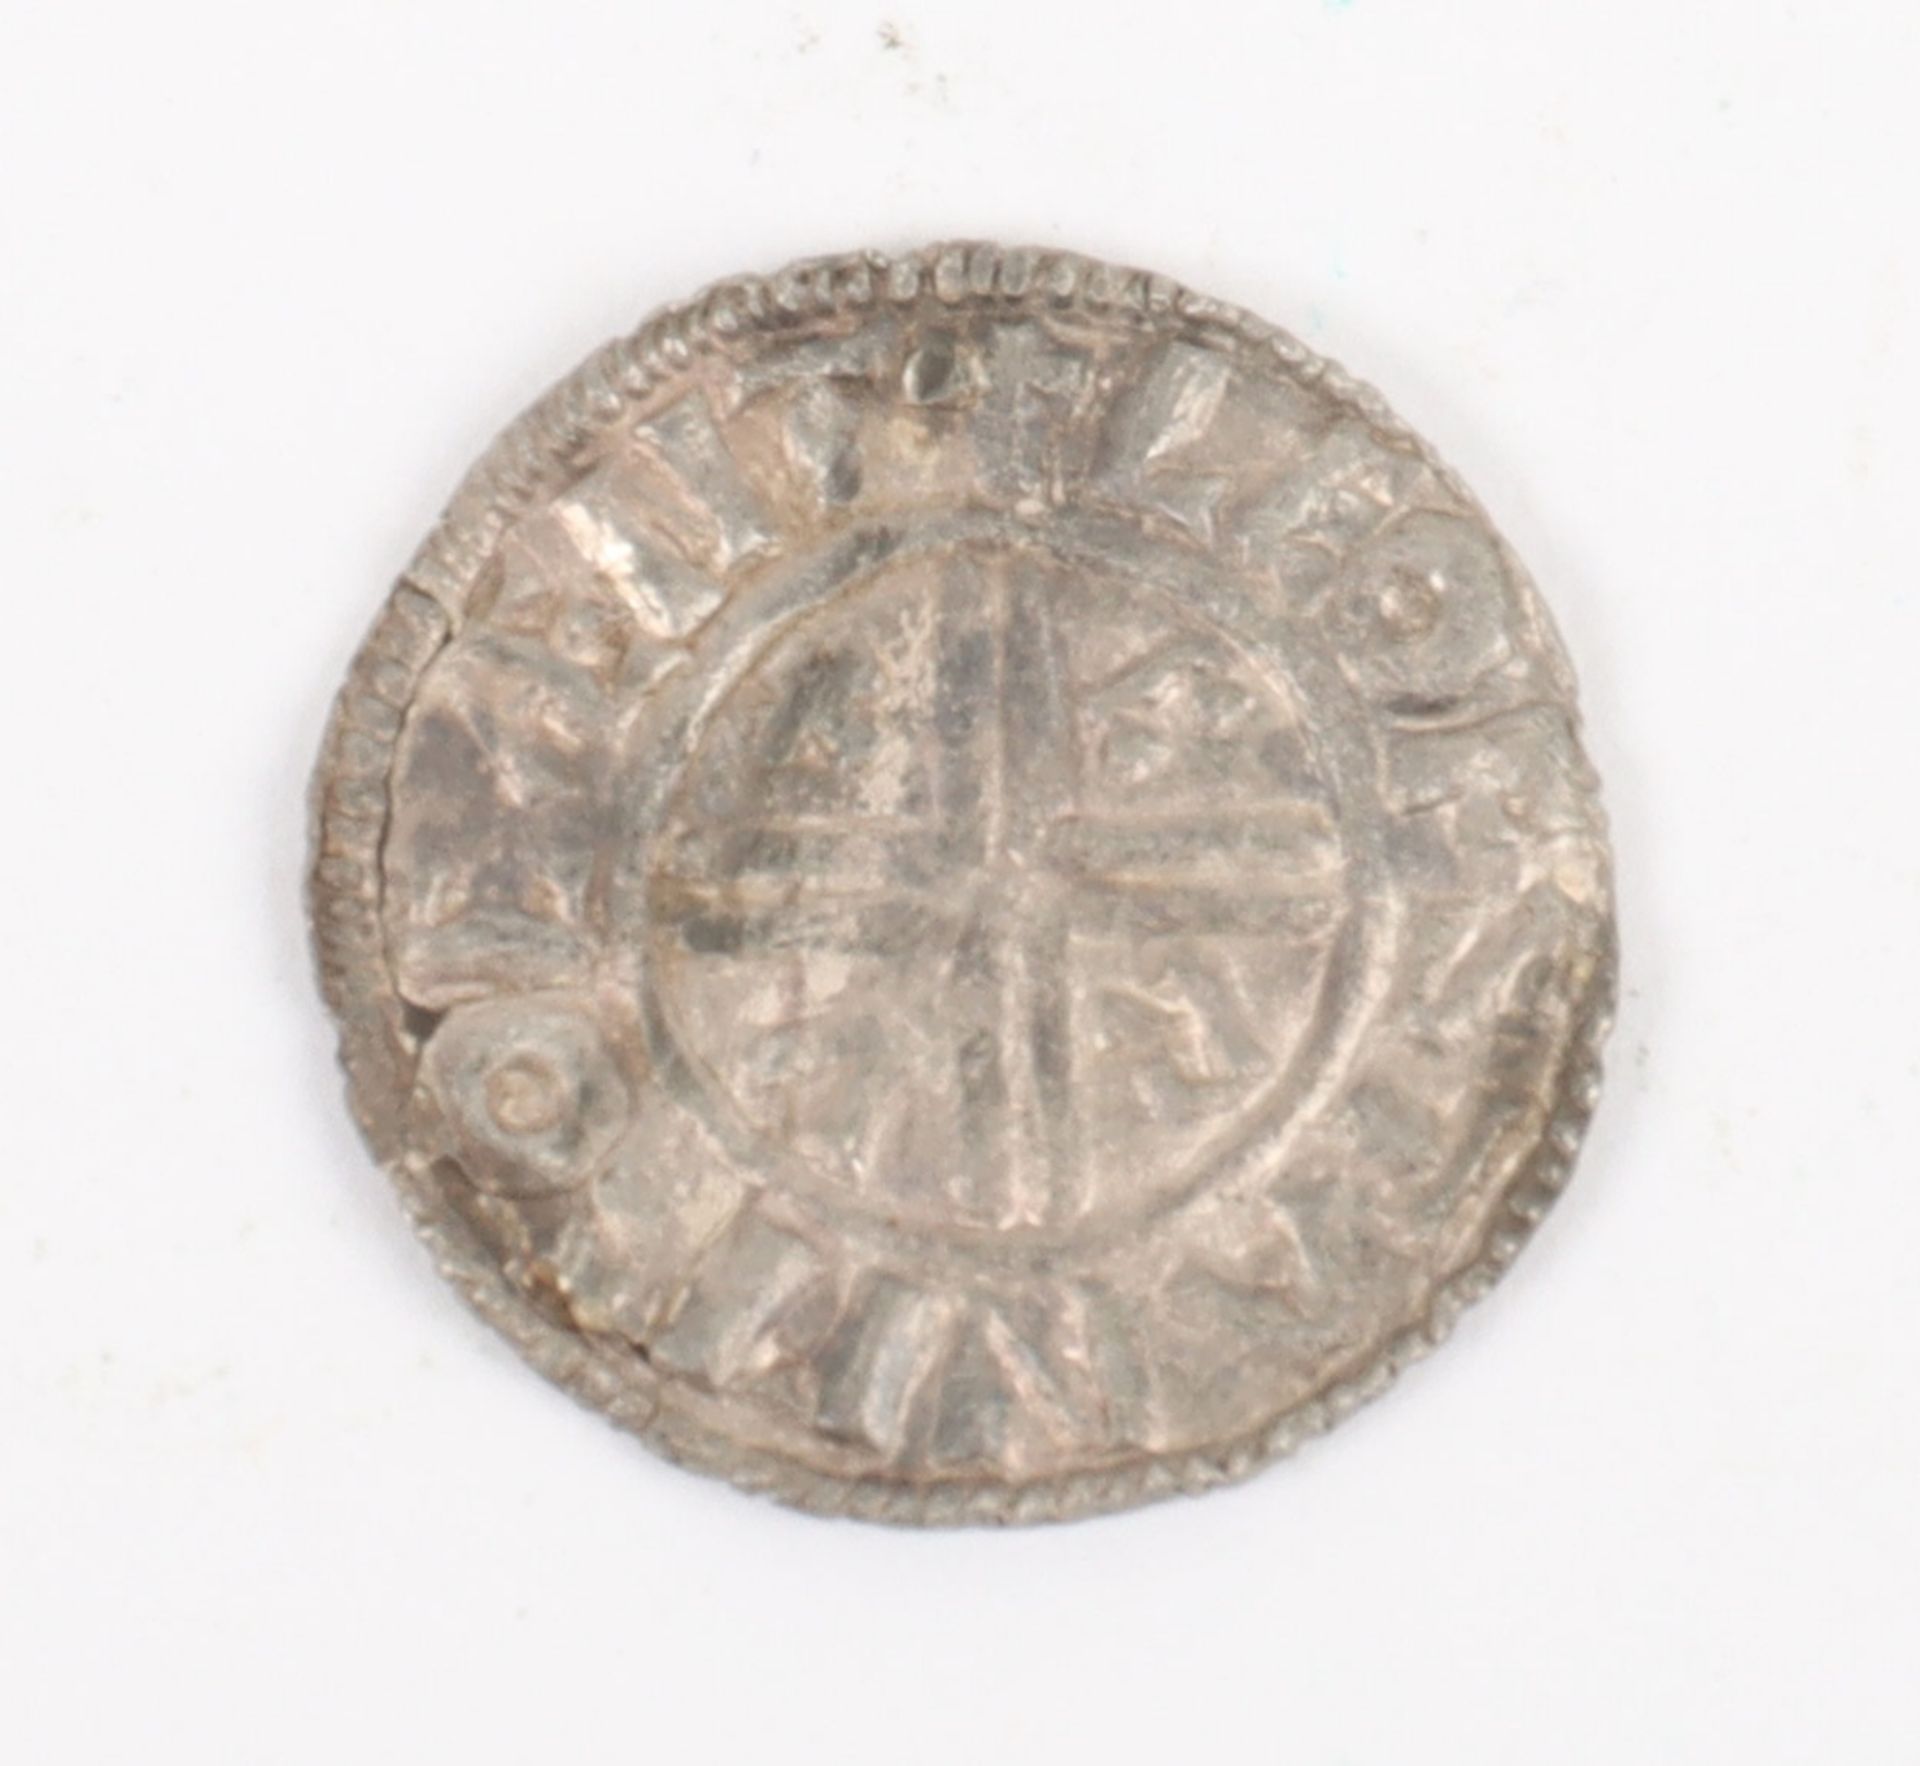 Aethelred II (978-1016), penny, crux type C.R.V.X in angles - Image 2 of 2